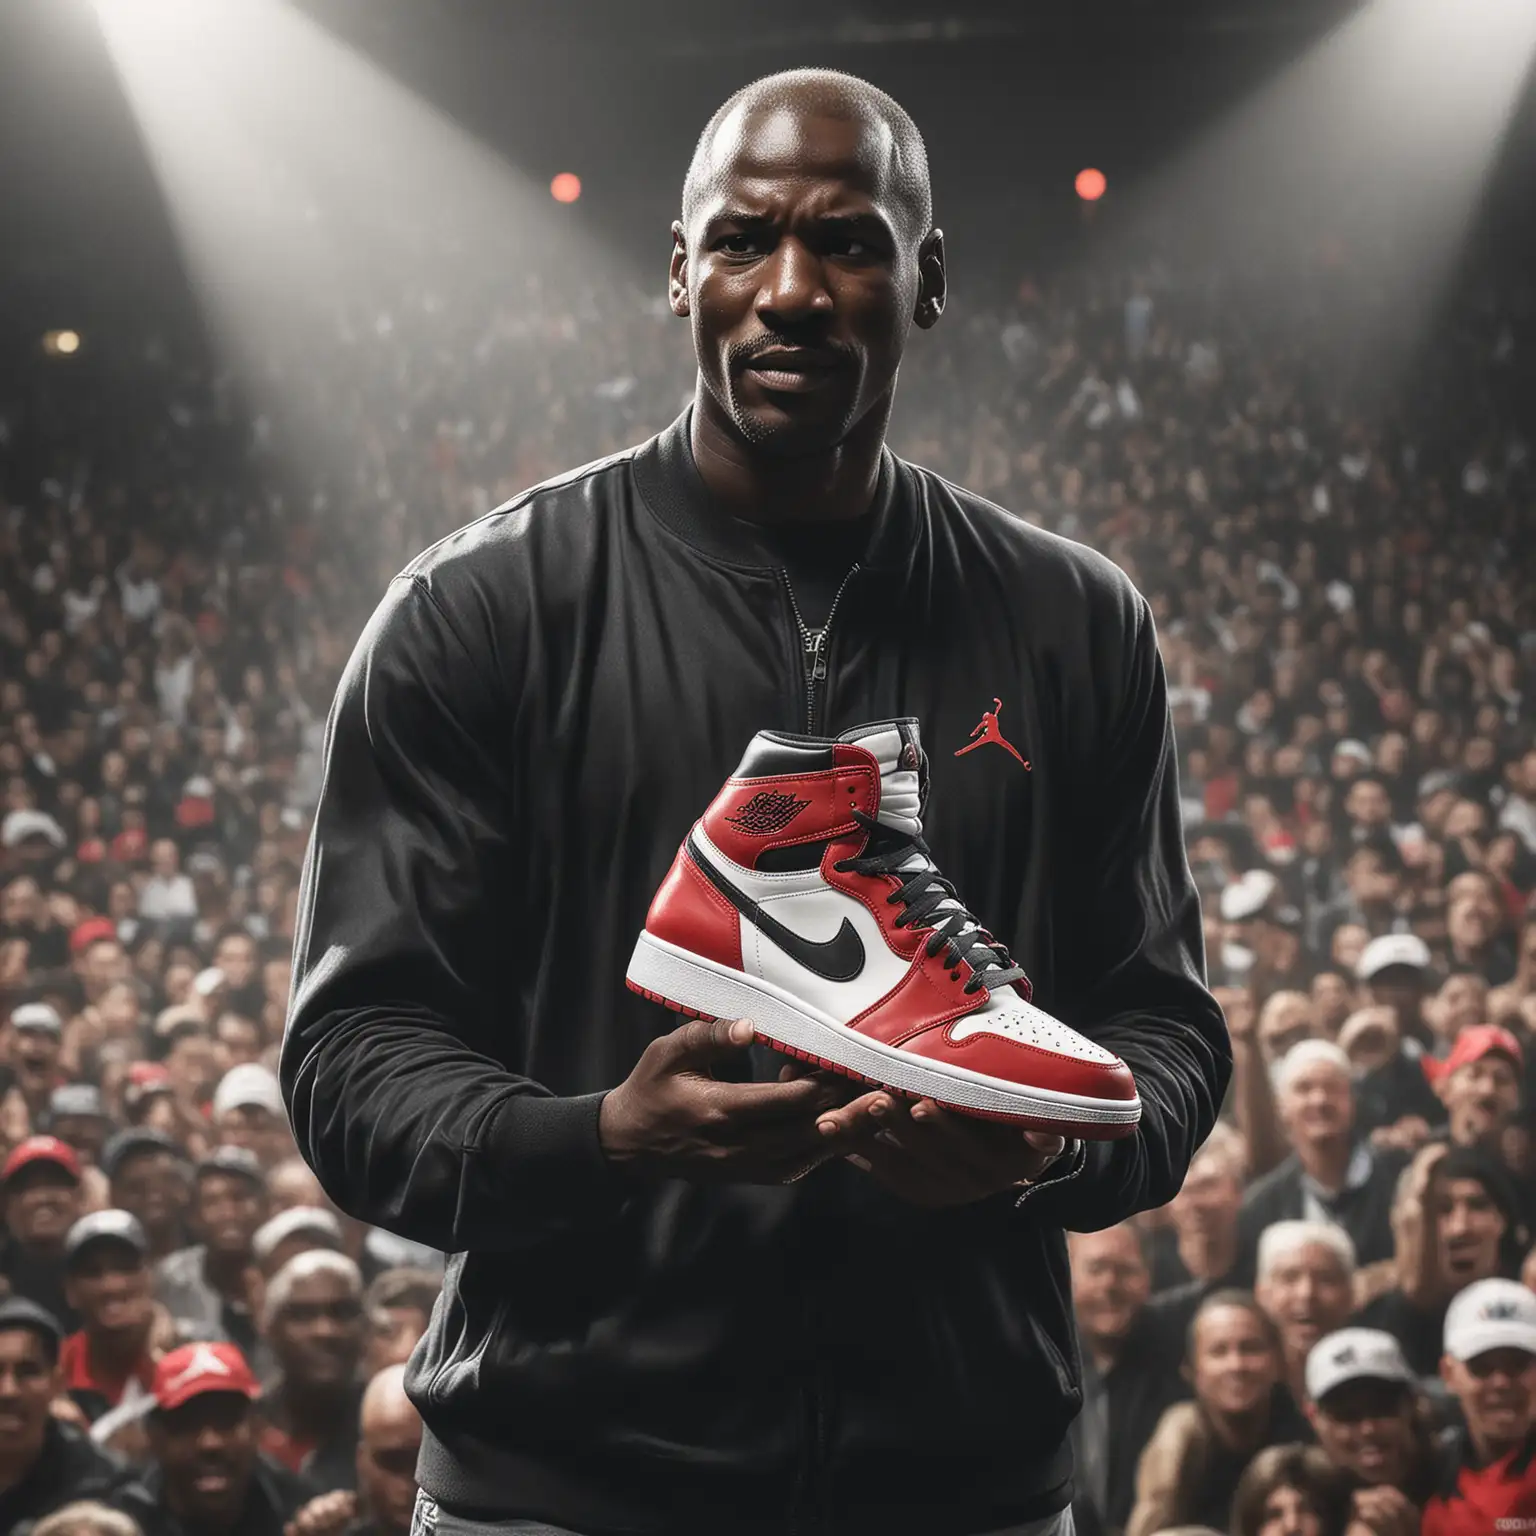 Micheal Jordan holding Jordan 1 sneakers shoes, cinematic lighting, angry expression, crowd audience background